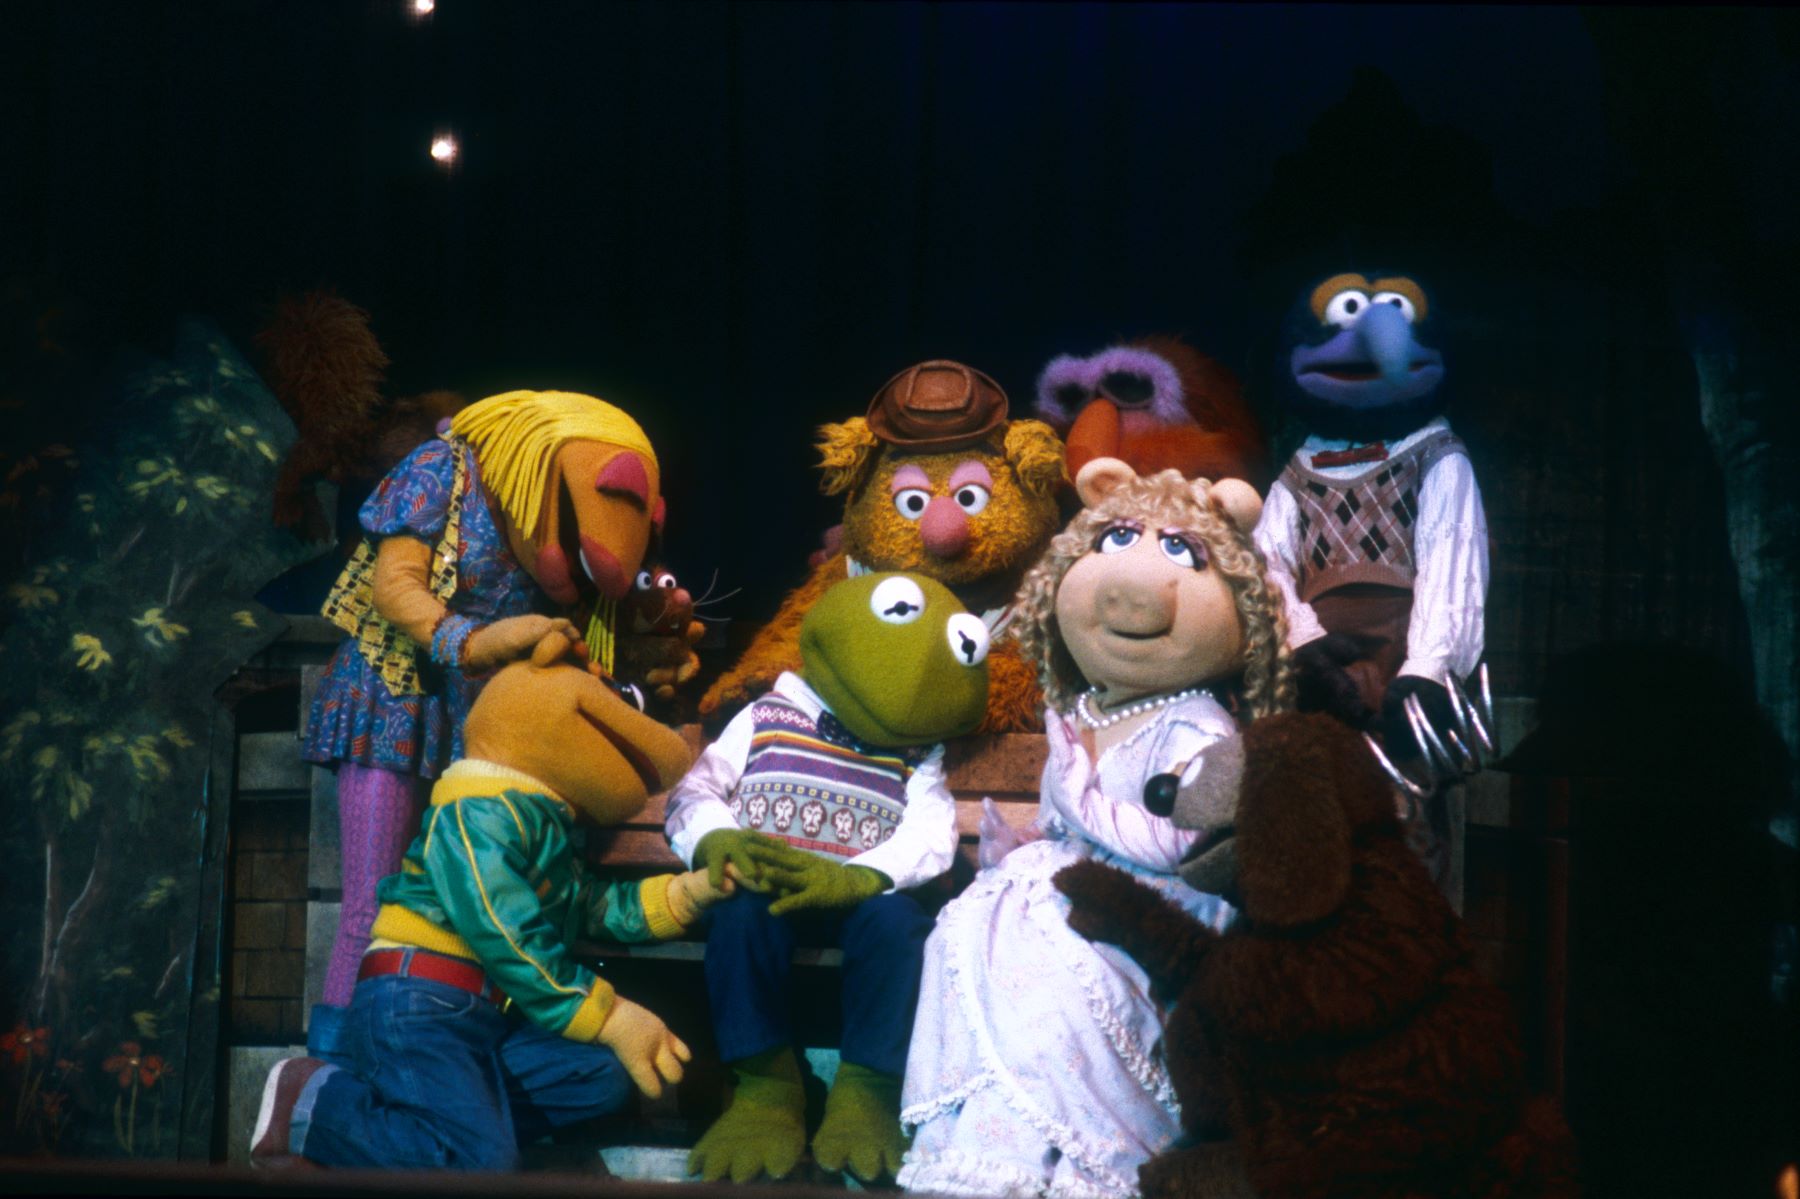 'The Muppet Show' European tour performance in London in 1987